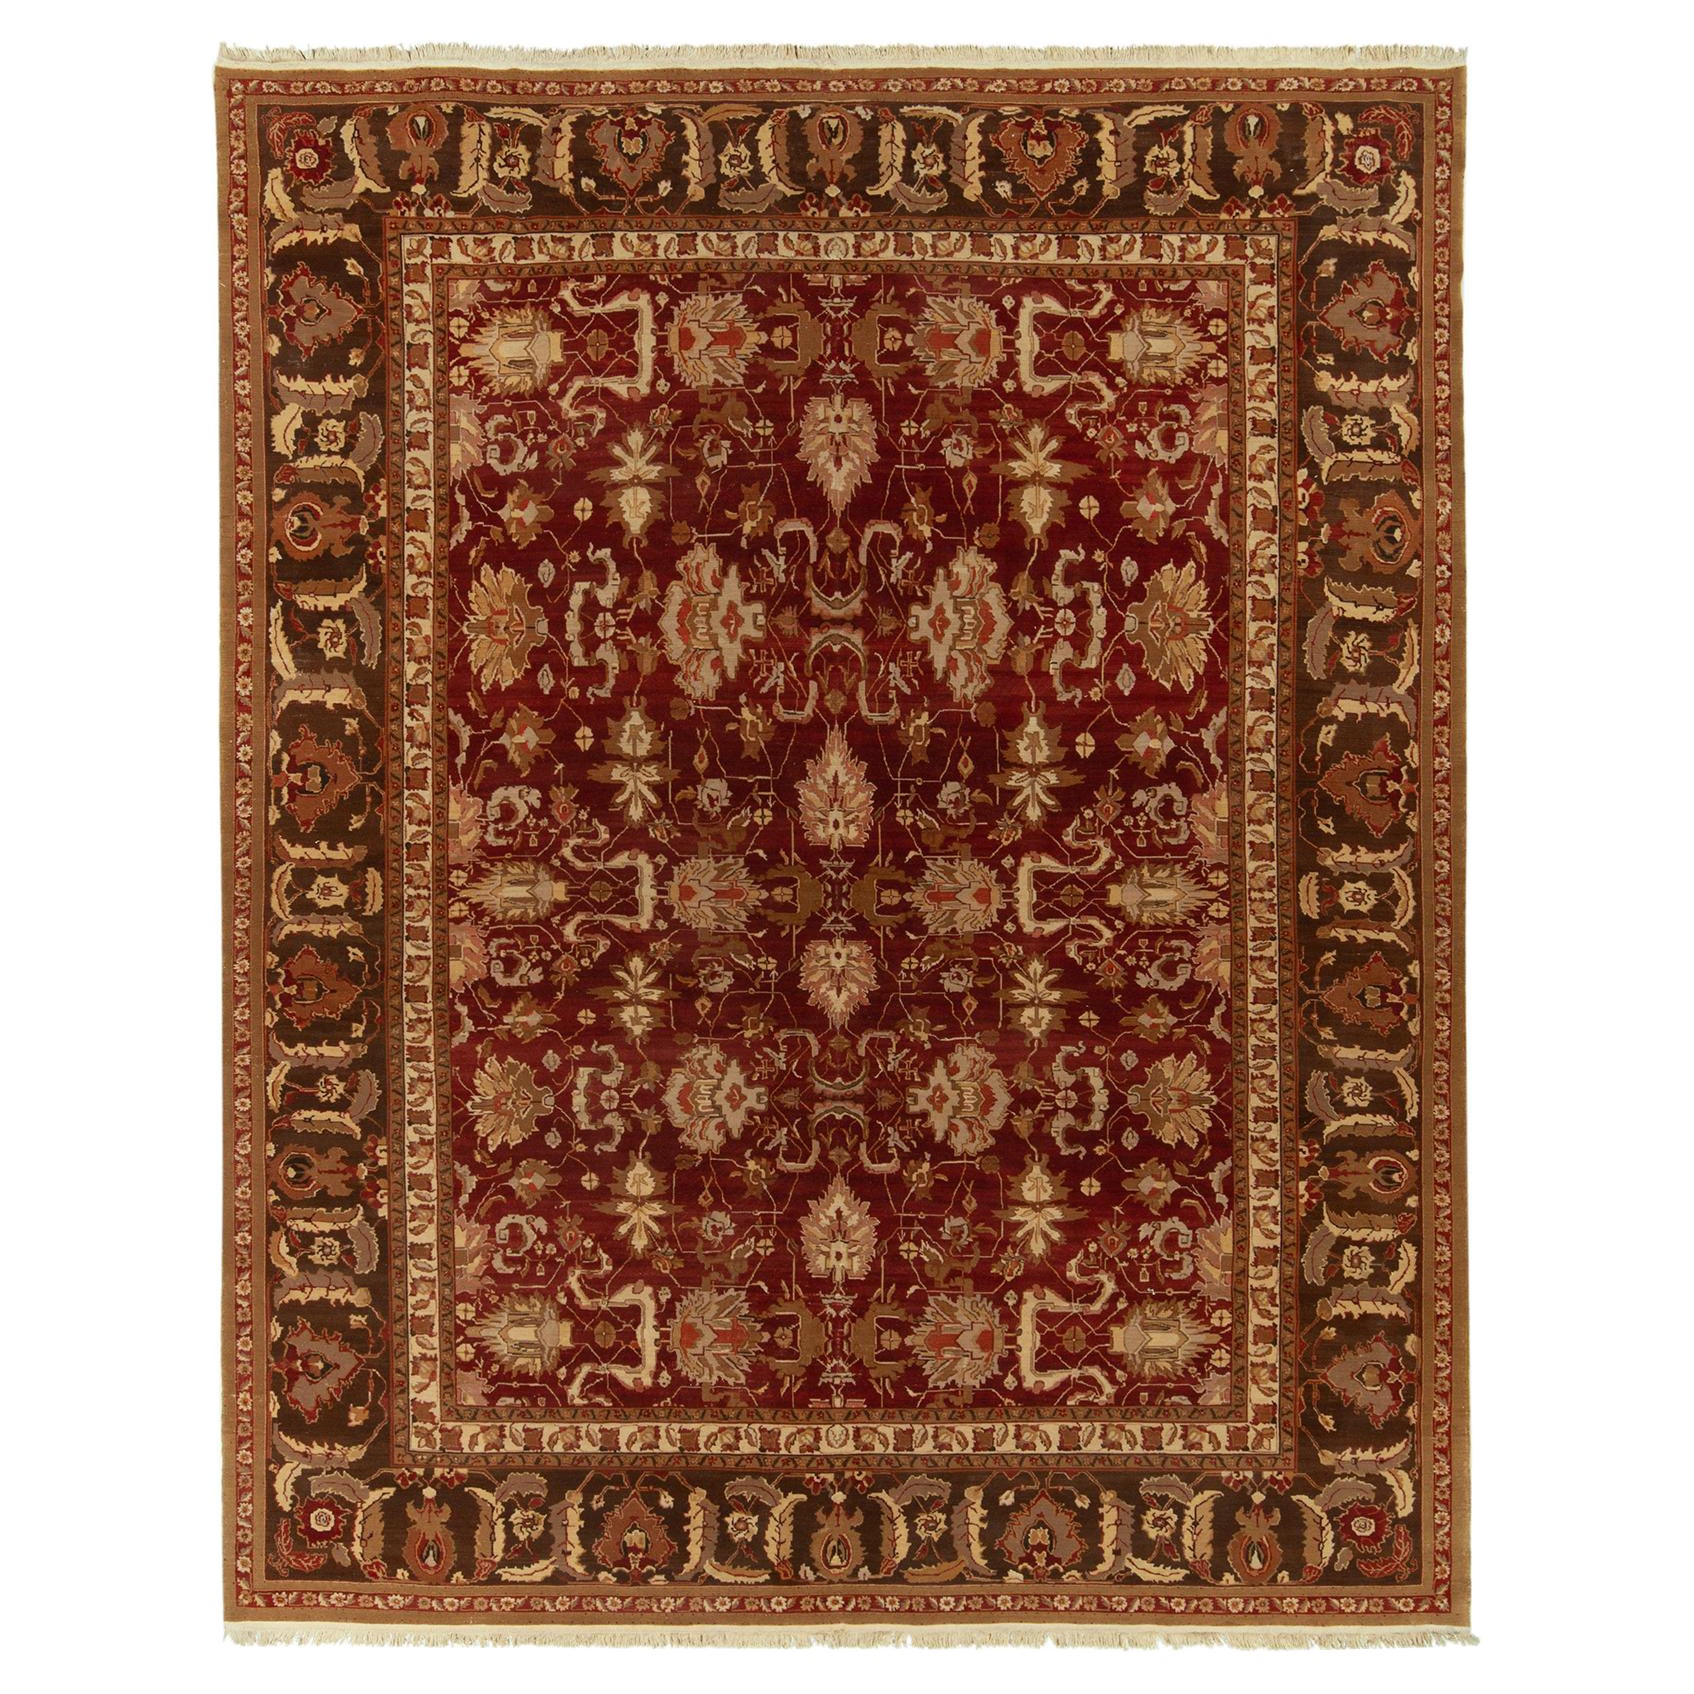 Rug & Kilim's Traditional Agra Style Rug in Red, Beige and Brown Floral Pattern